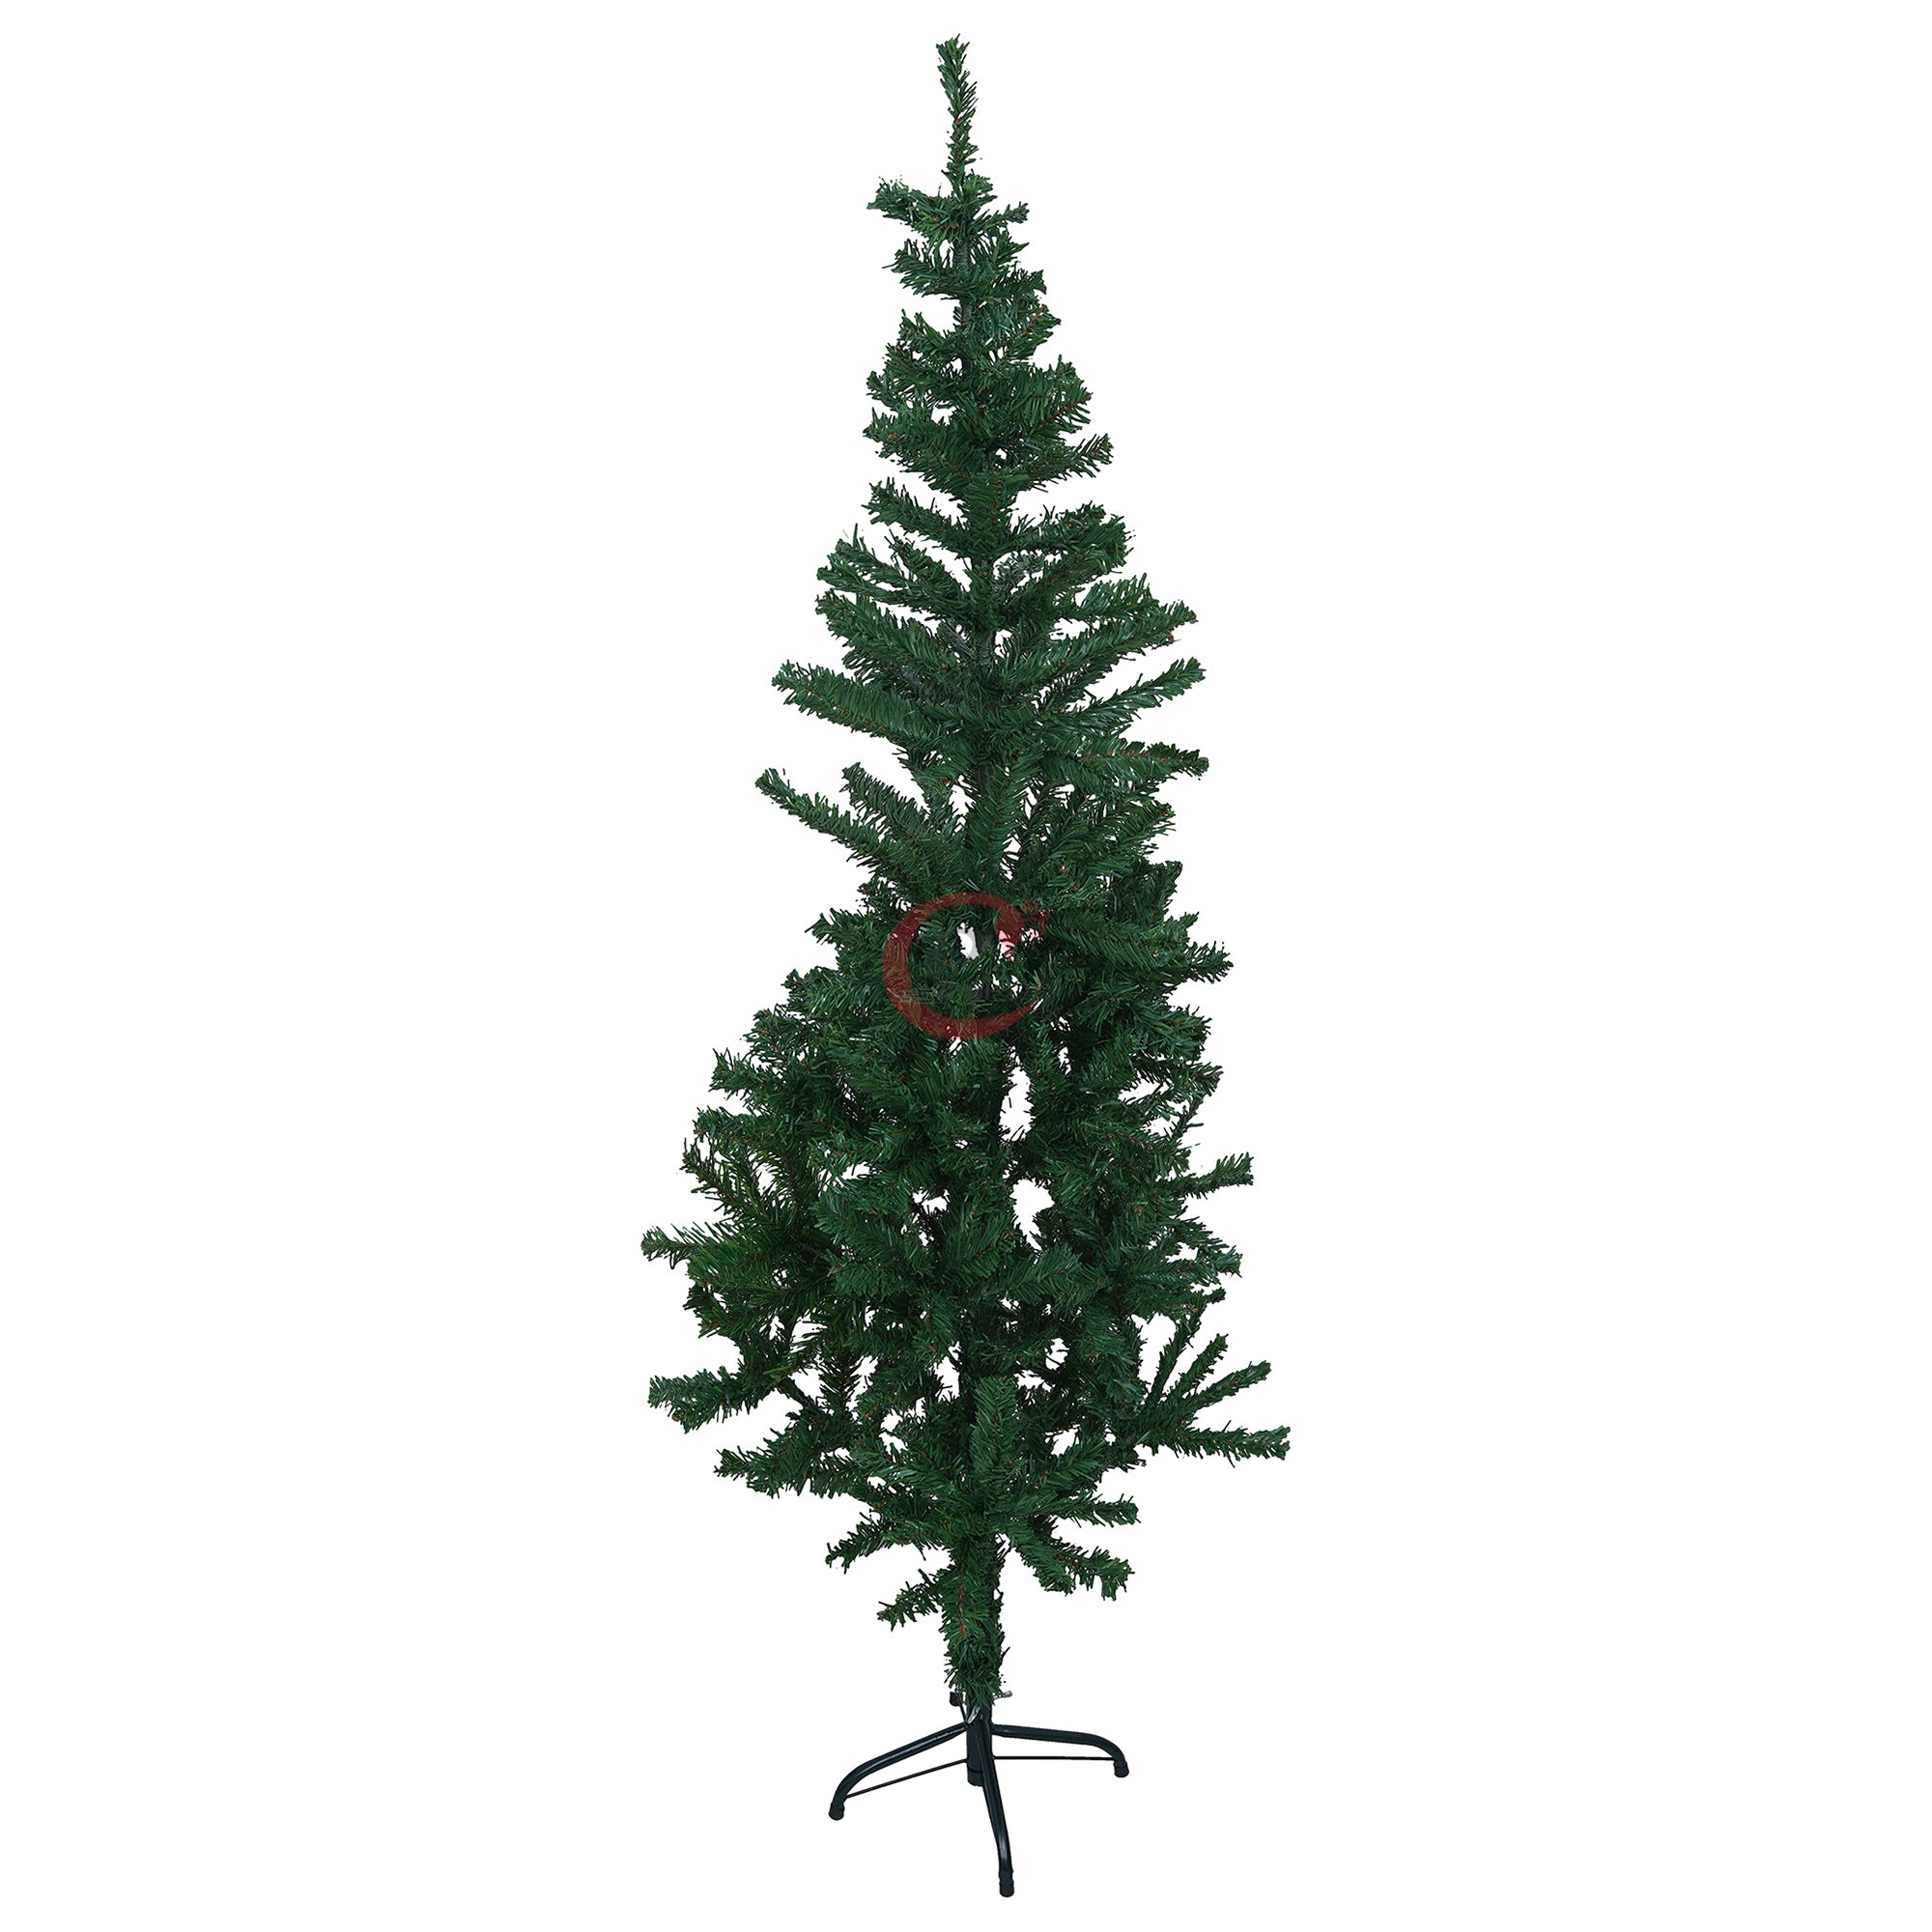 eCraftIndia 5 Feet Green Artificial Christmas Tree Xmas Pine Tree with Stand and 100 Christmas Decoration Ornaments Props - Merry Christmas Decoration Item for Home, Office, and Church 8